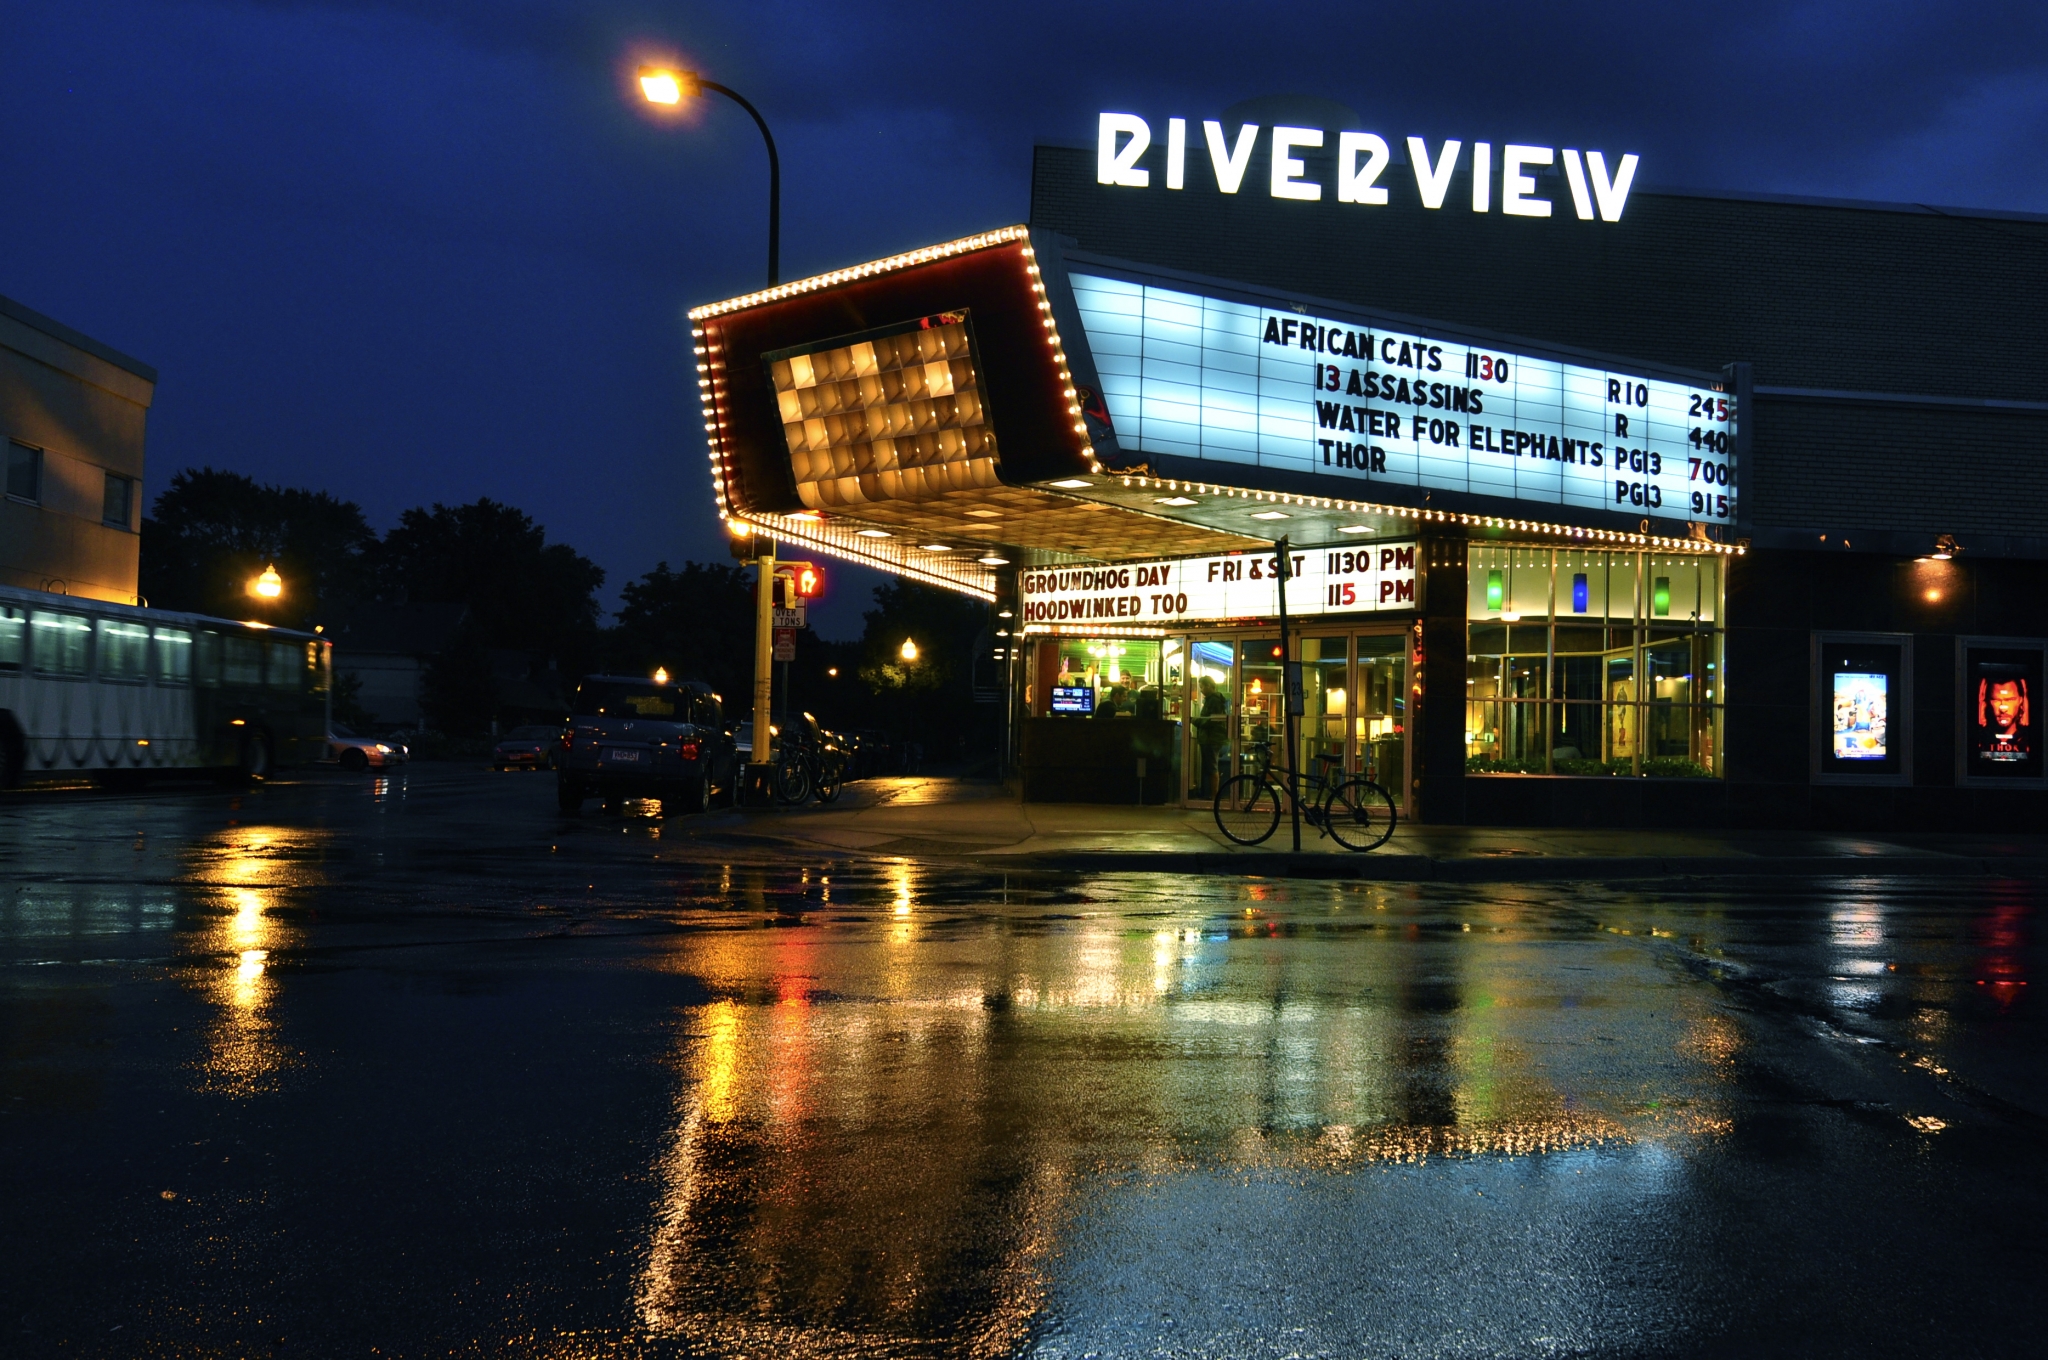 Riverview theater at night